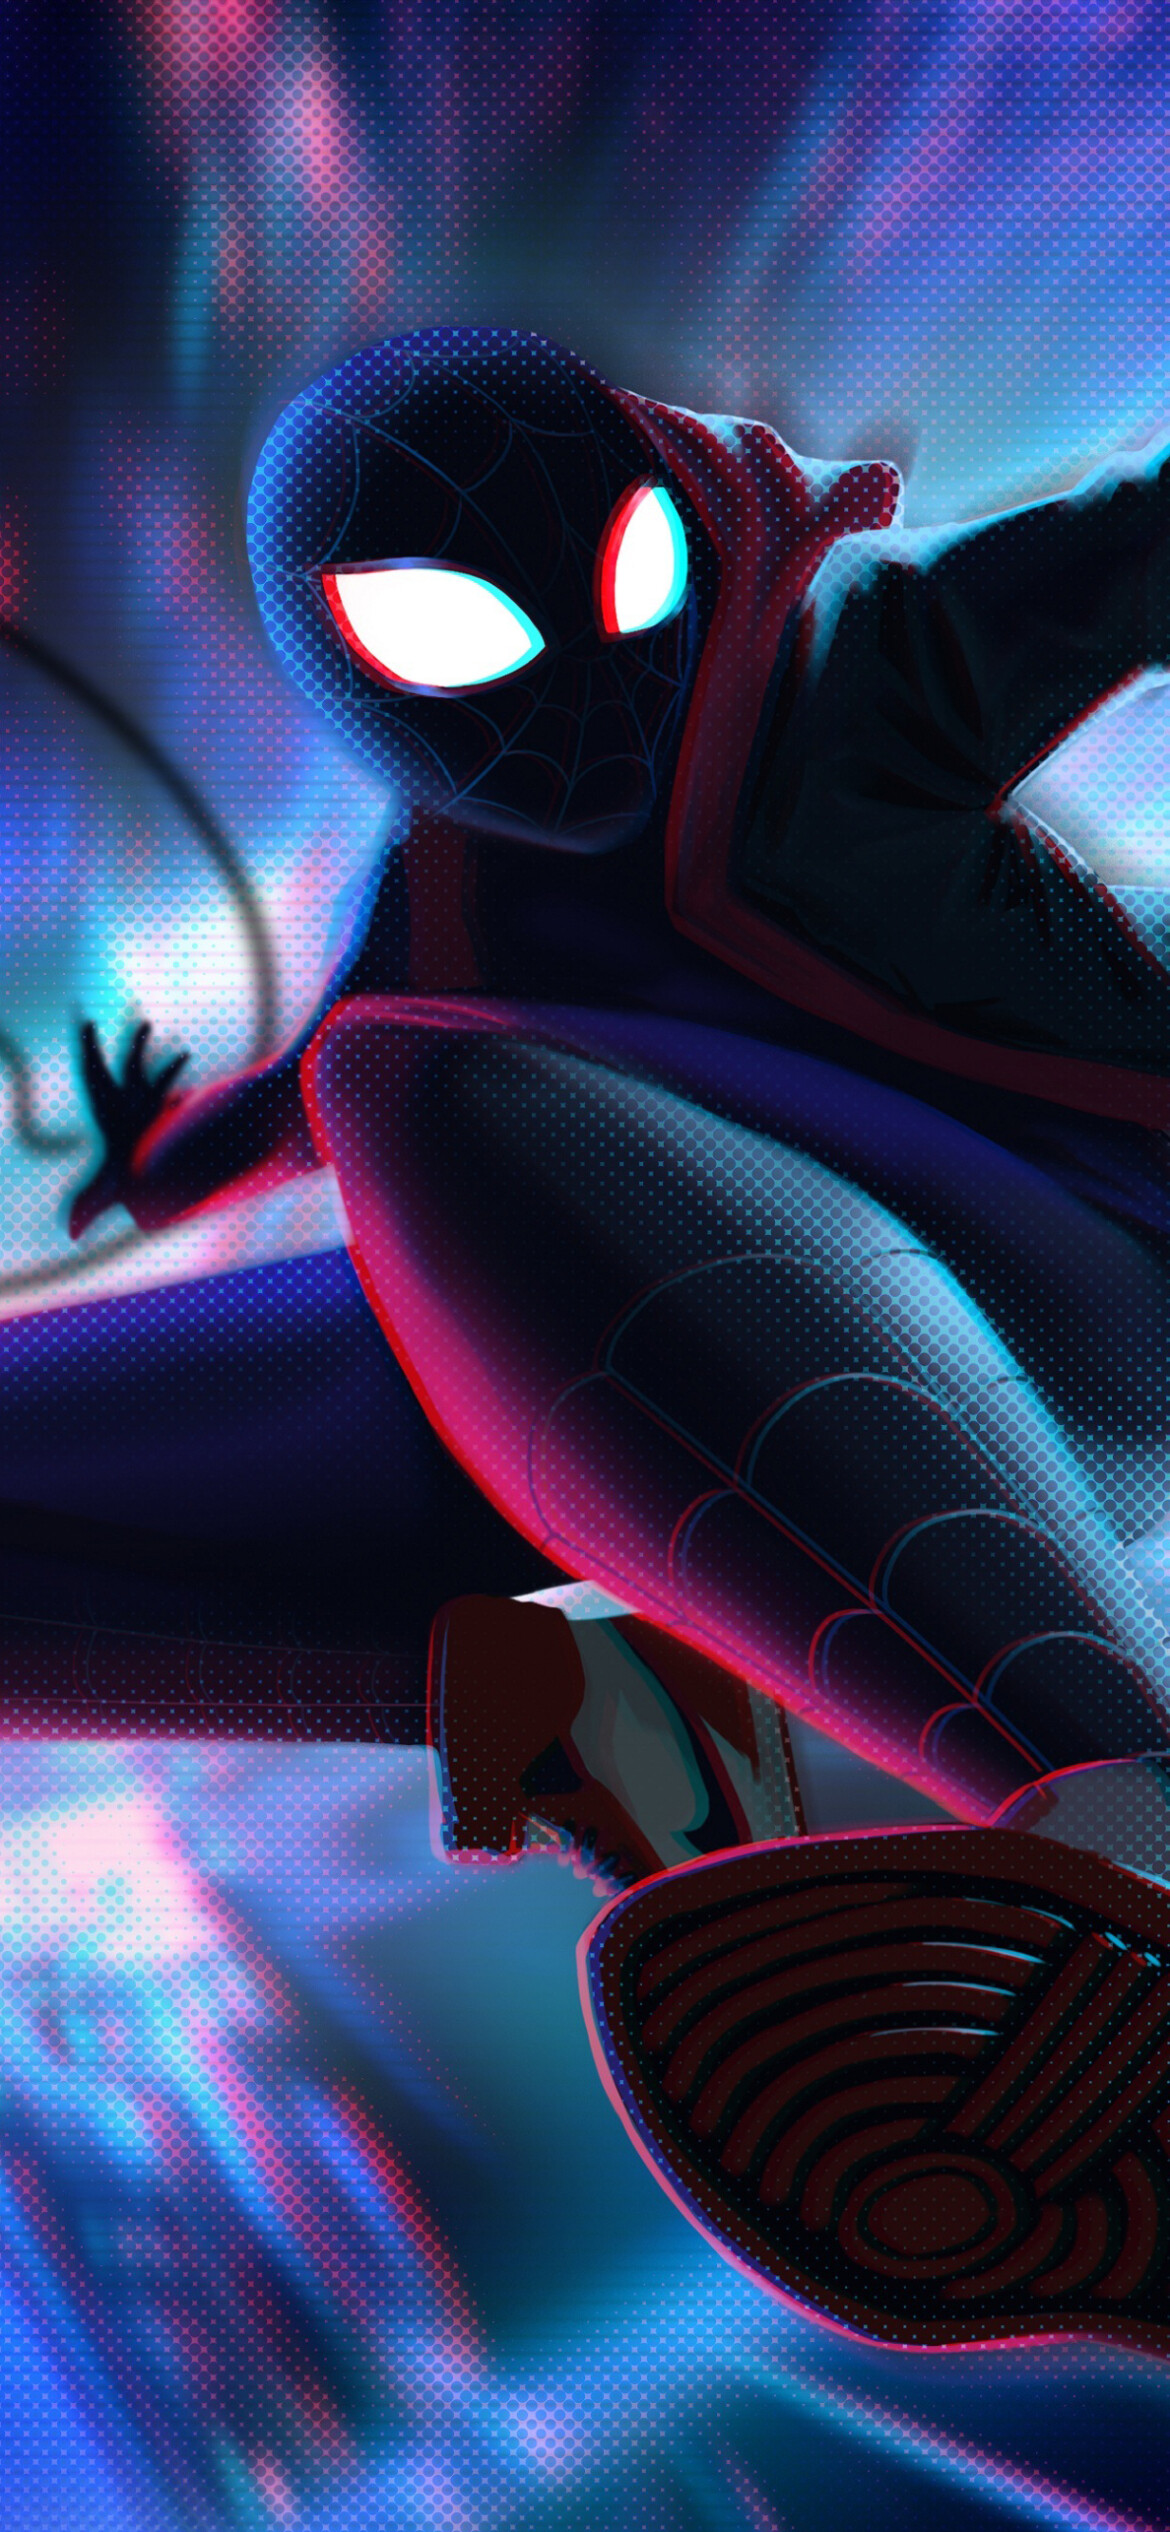 Spider-Man: Into the Spider-Verse: The film focuses on Miles Morales who voiced by Shameik Moore. 1170x2540 HD Background.